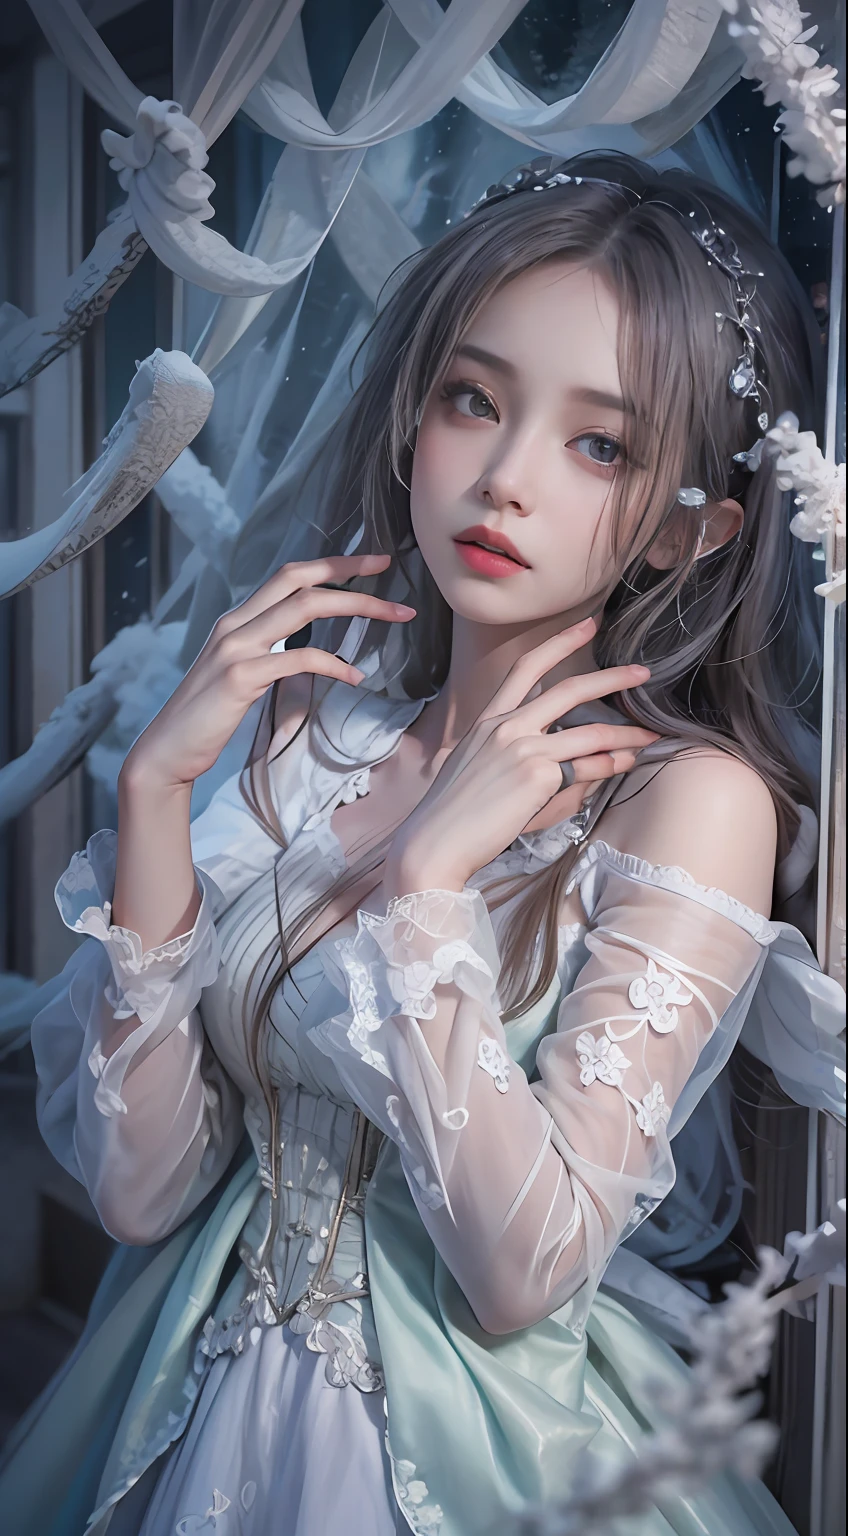 （8K，RAW photos， best qualtiy， tmasterpiece：1.2），（realisticlying， photograph realistic：1.4)，Hide your face with sadness，
Lolita costume，Lace， Aerith Gainsborough， The upper part of the body，upper legs，Lace， undergarments，exposed bare shoulders， do lado de fora， (outside，Covered with snow，cloaks，) high high quality， Adobe Lightroom， highdetailskin， looking at viewert，